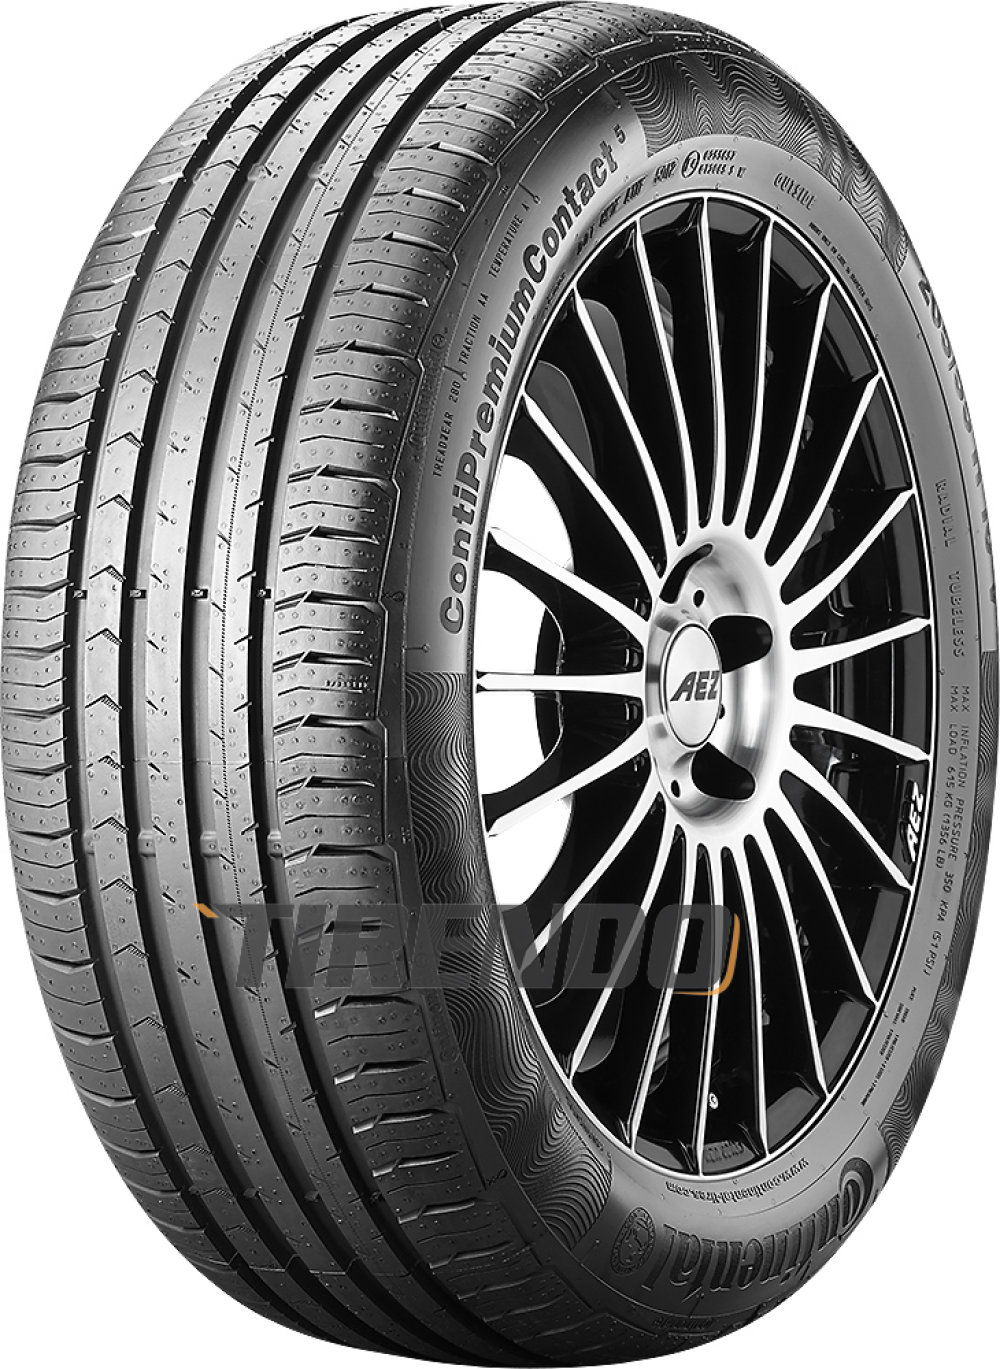 Image of Continental ContiPremiumContact 5 ( 215/55 R17 94V Conti Seal )